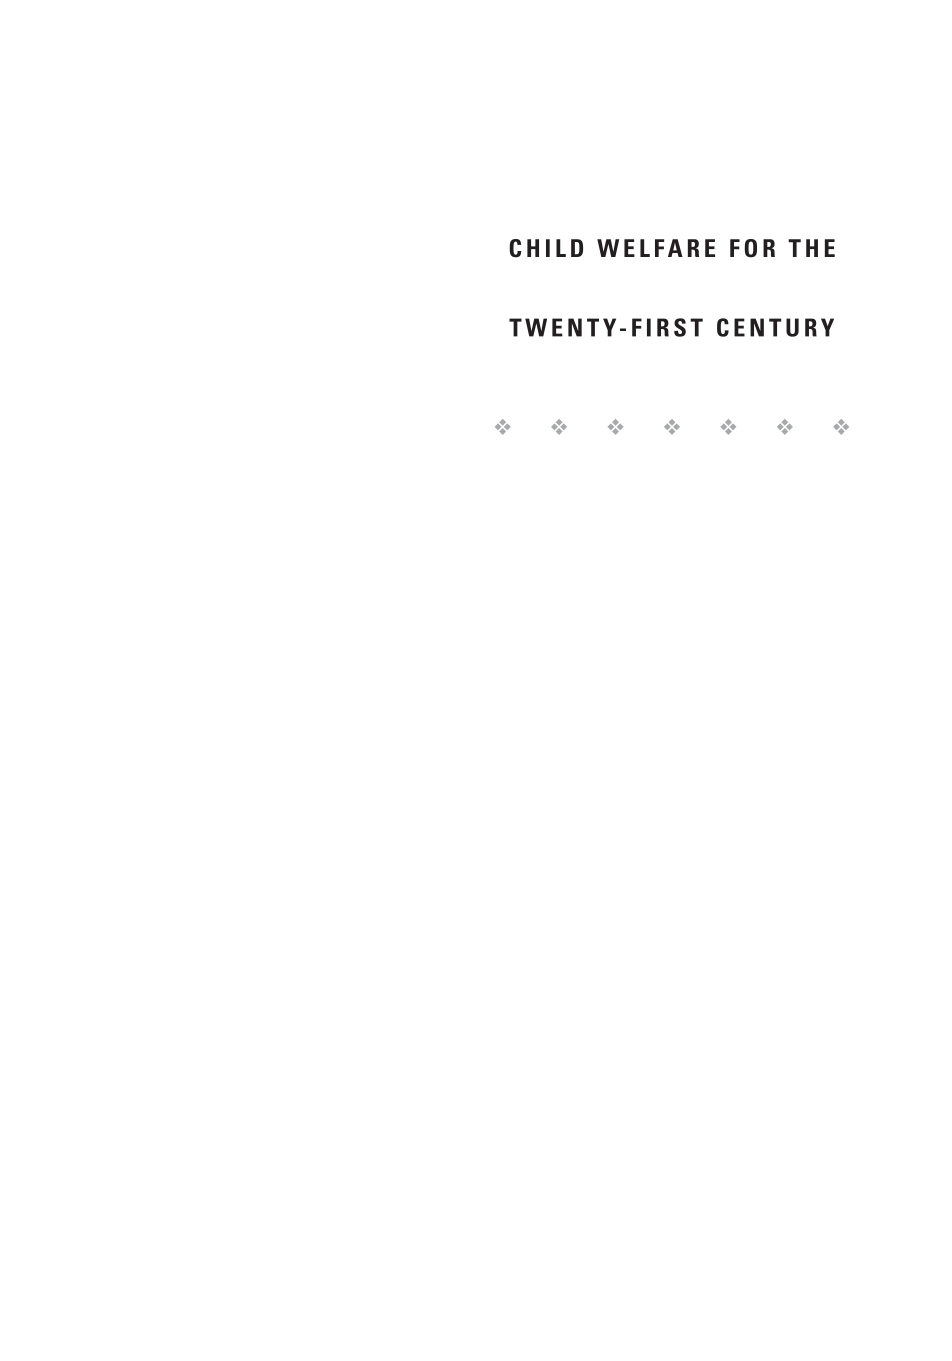 Child Welfare for the Twenty-first Century: A Handbook of Practices, Policies, and Programs, second edition page i